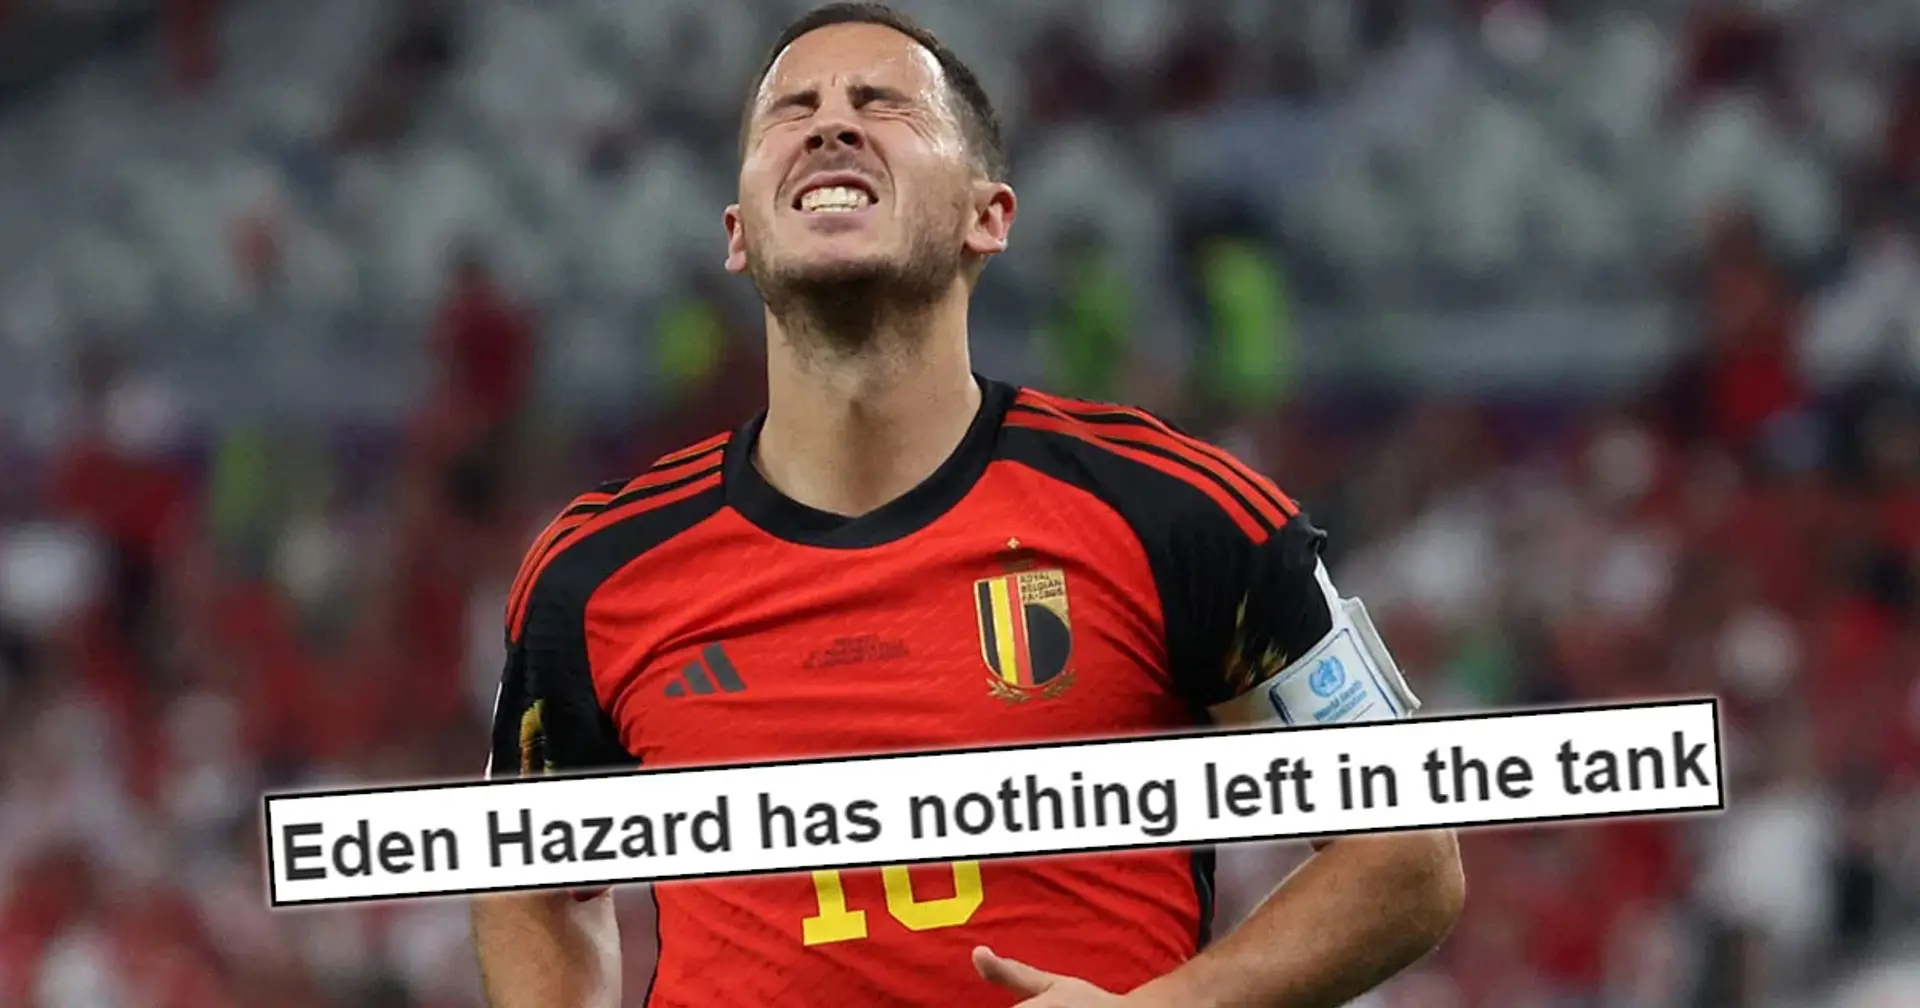 'He is so finished': Fans lambast Hazard after Belgium's shock loss to Morocco